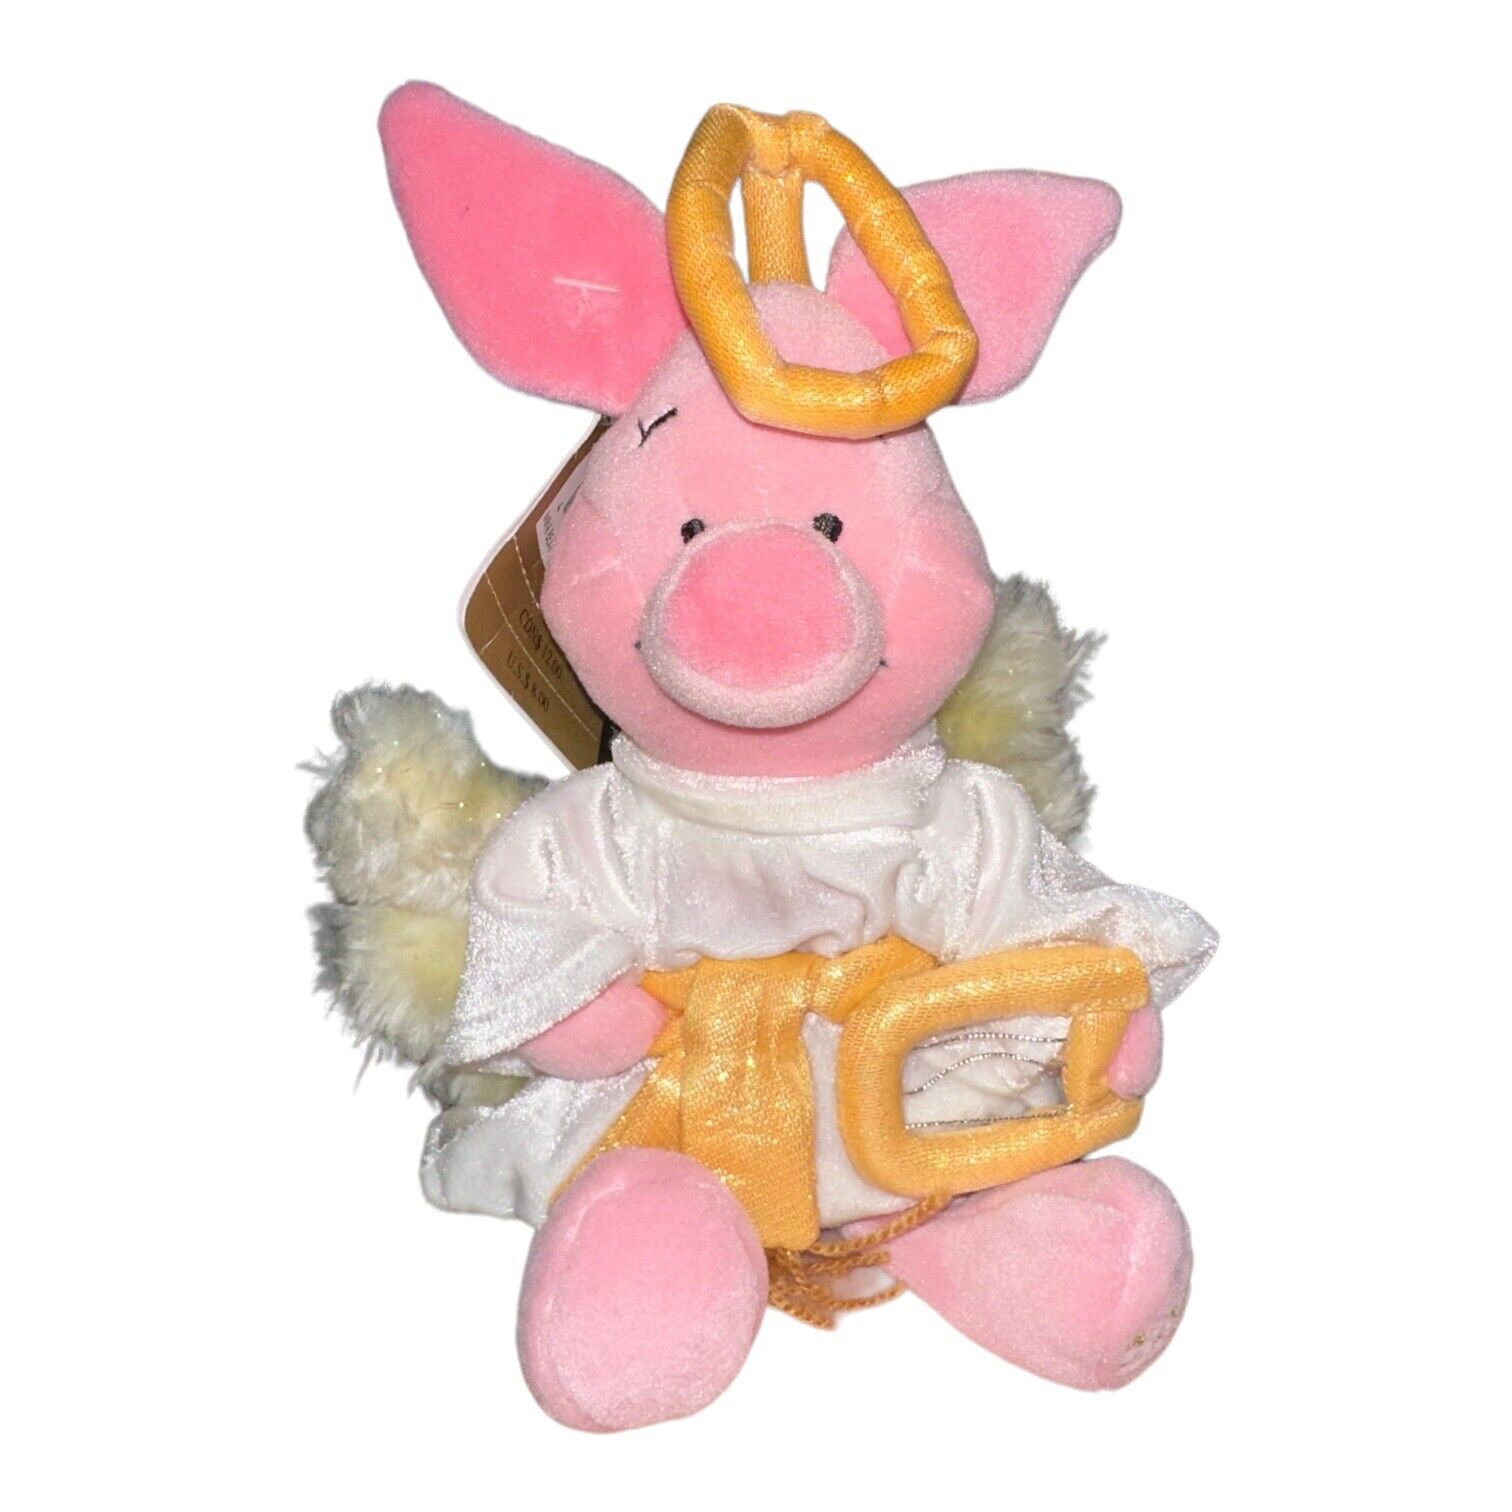 Vintage Disney Store Angel Piglet Plush Christmas 2000 New With Tags NWT 8”